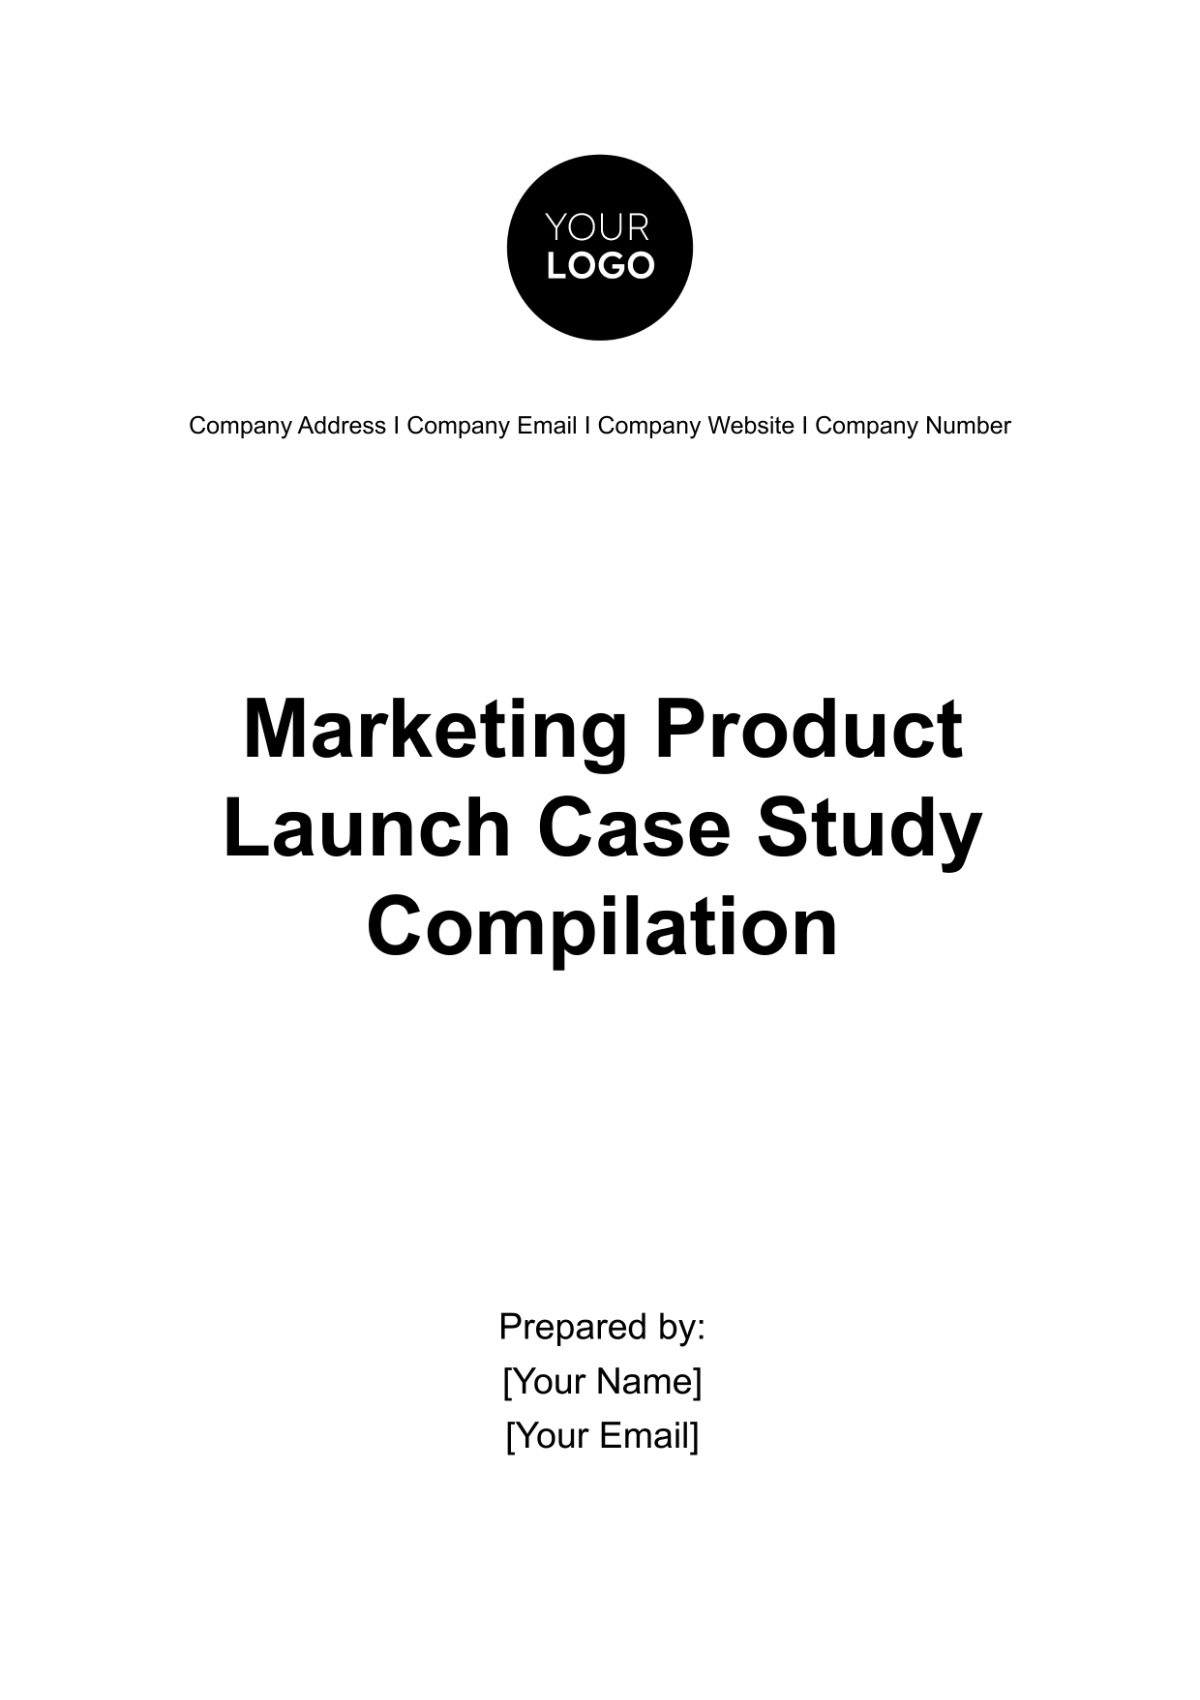 Marketing Product Launch Case Study Compilation Template